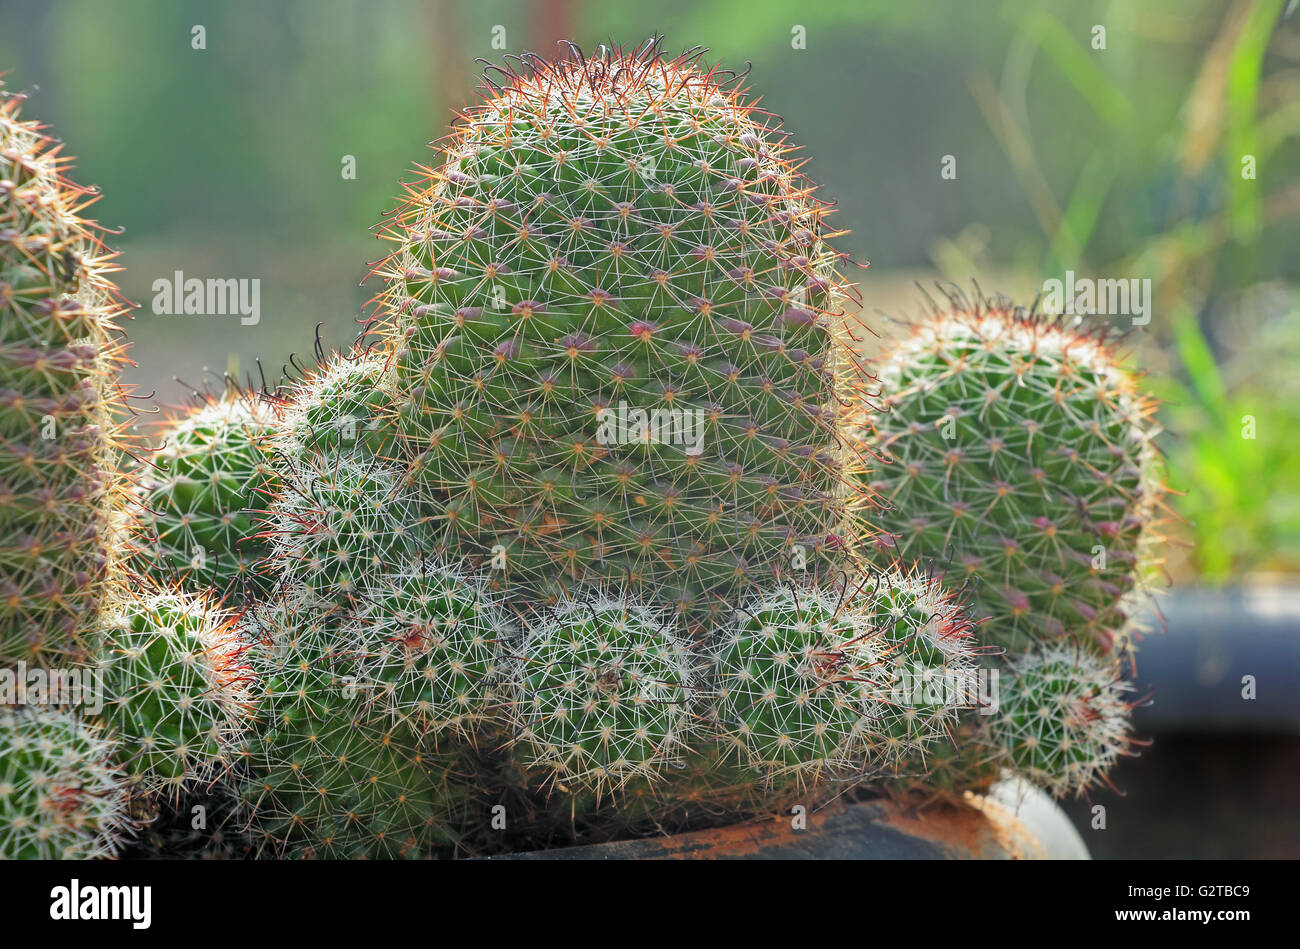 Close up of Cactus plants, Lithops Glaudinae Aizoaceae. Plant family, Cactaceae Used as food, fodder and ornamental plants. Stock Photo